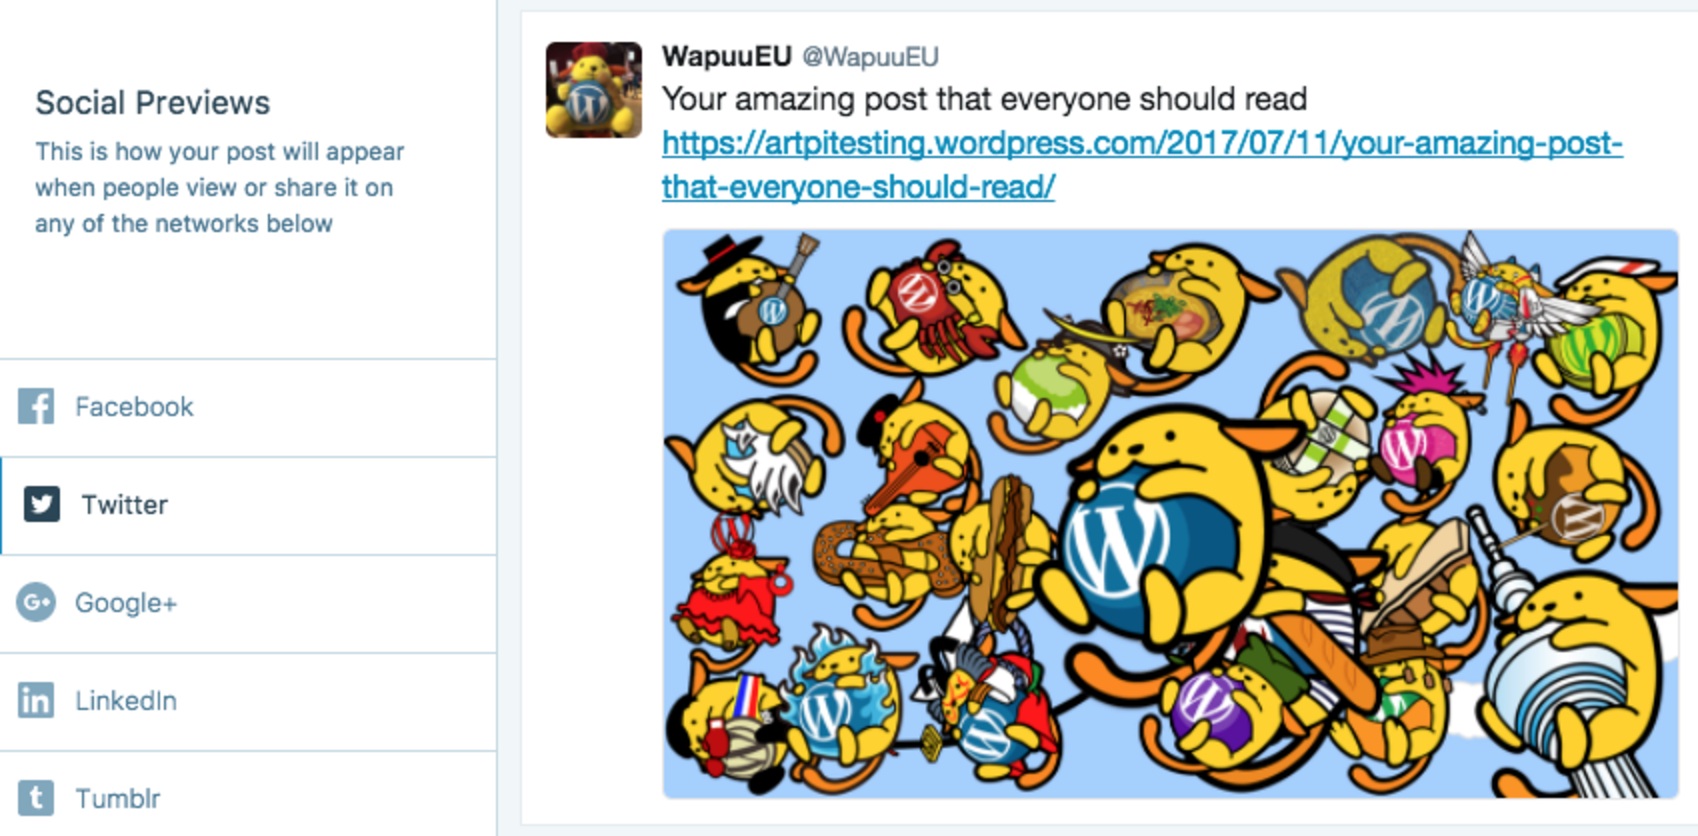 WordPress.com Introduces Scheduling for Social Media Posts